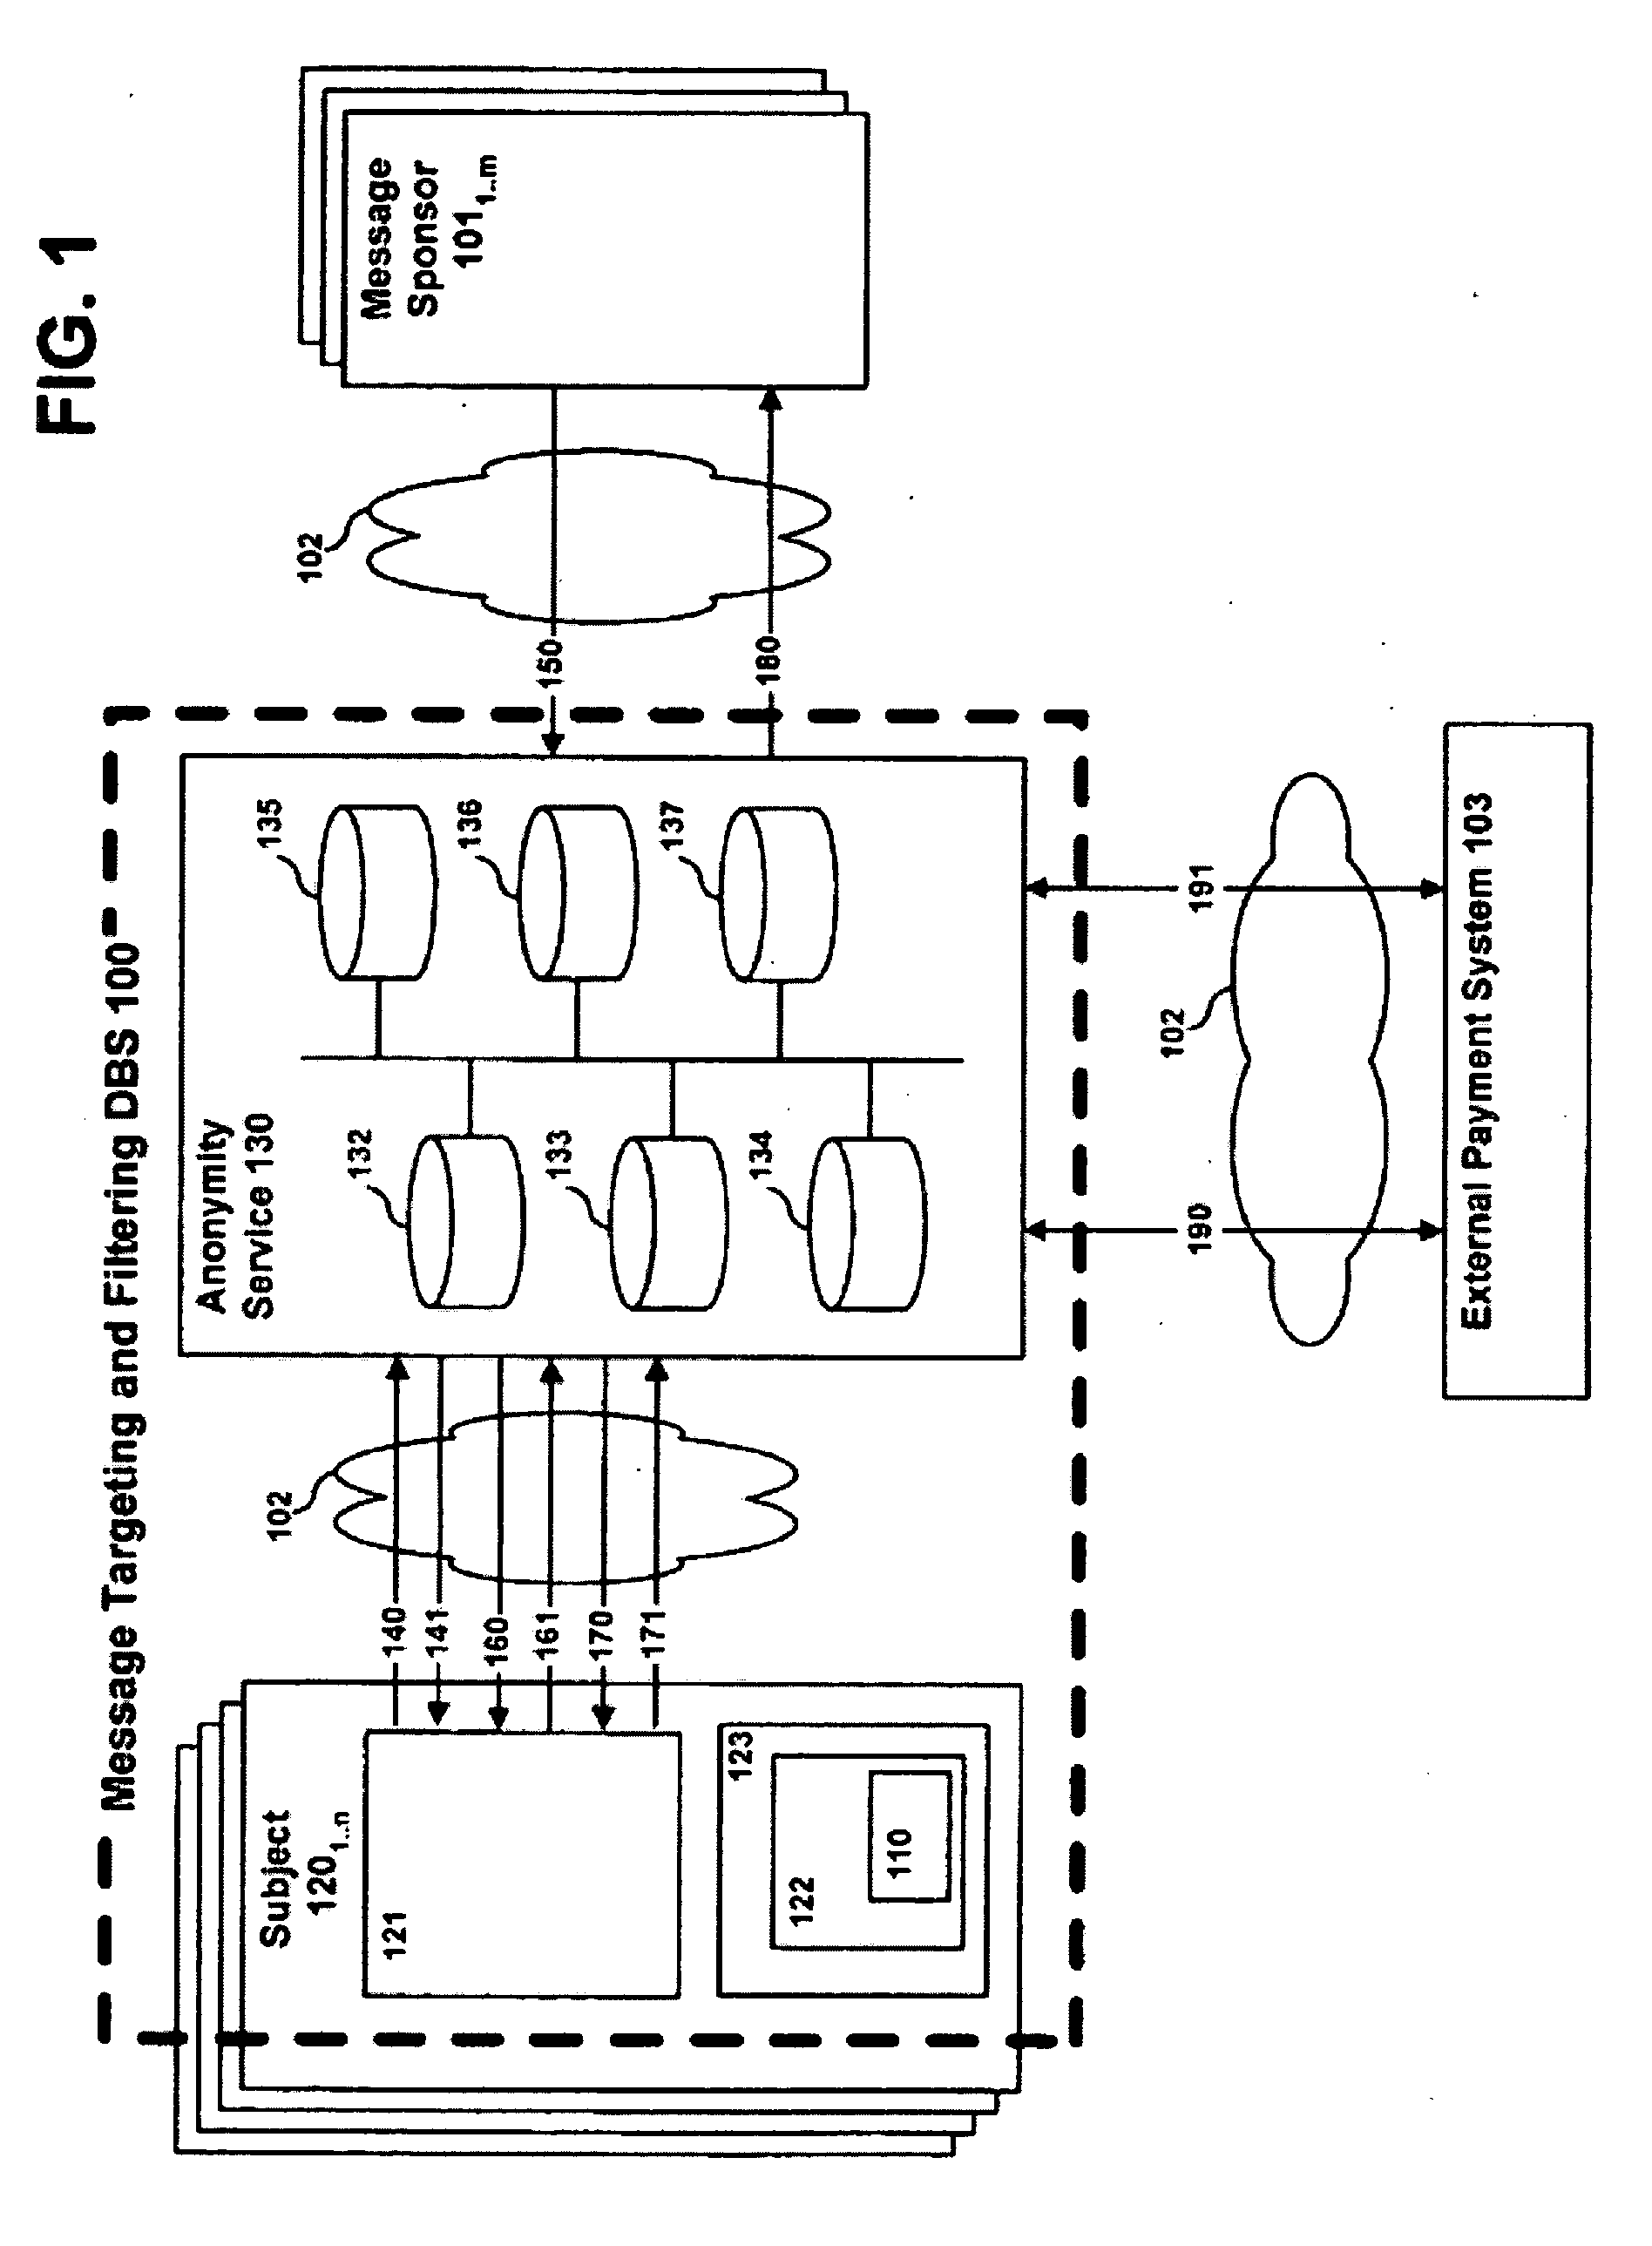 System, method and apparatus for message targeting and filtering